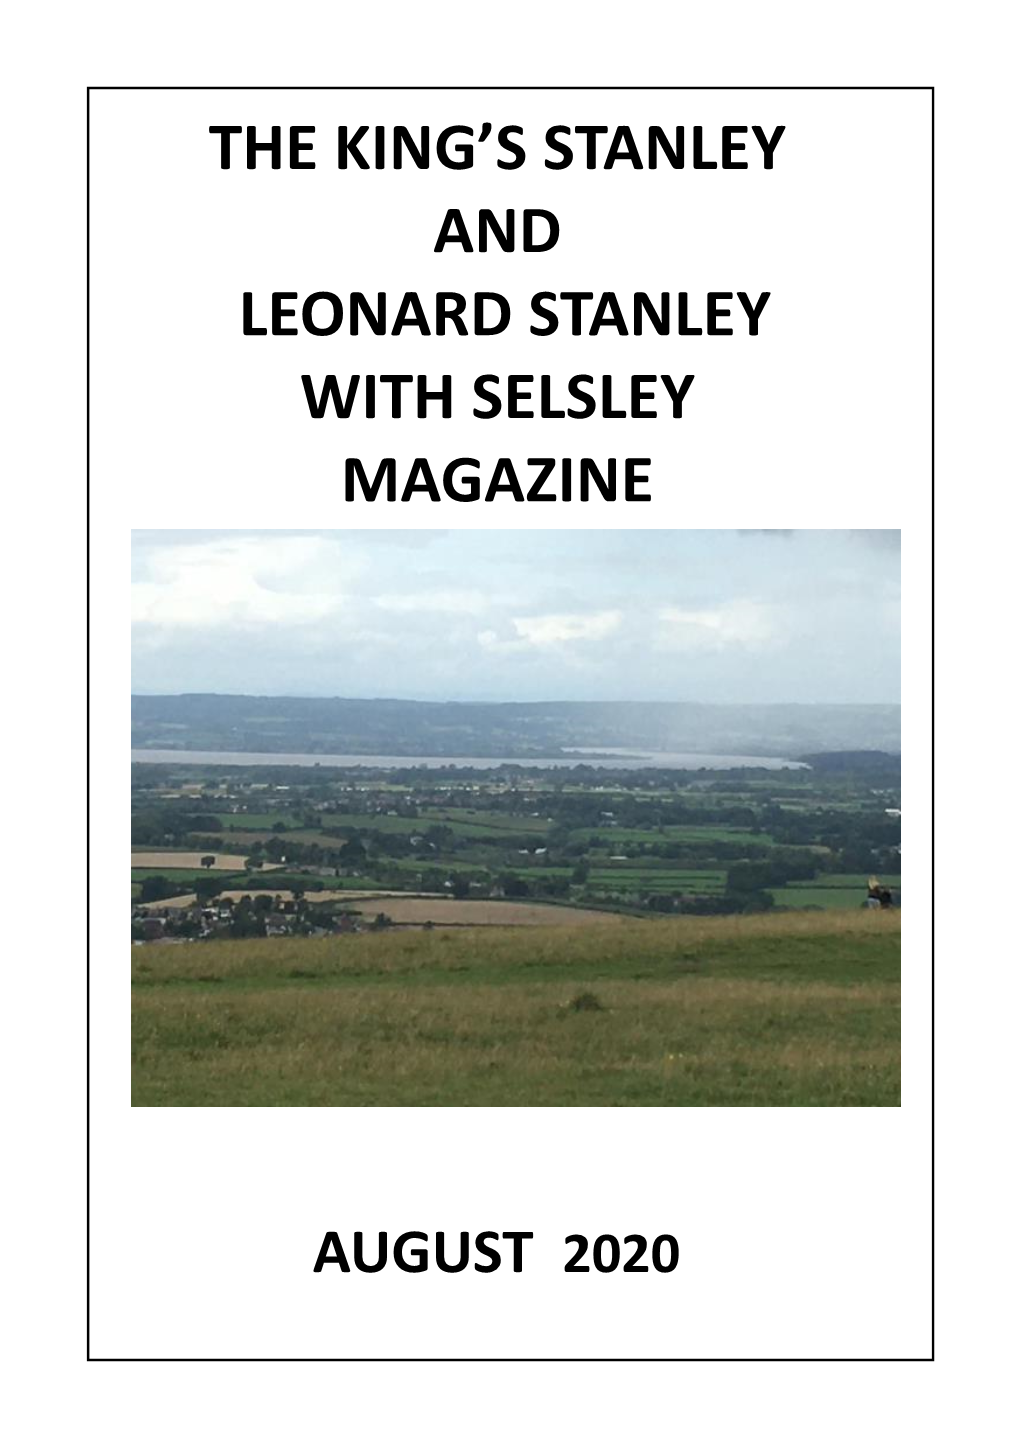 The King's Stanley and Leonard Stanley with Selsley Magazine